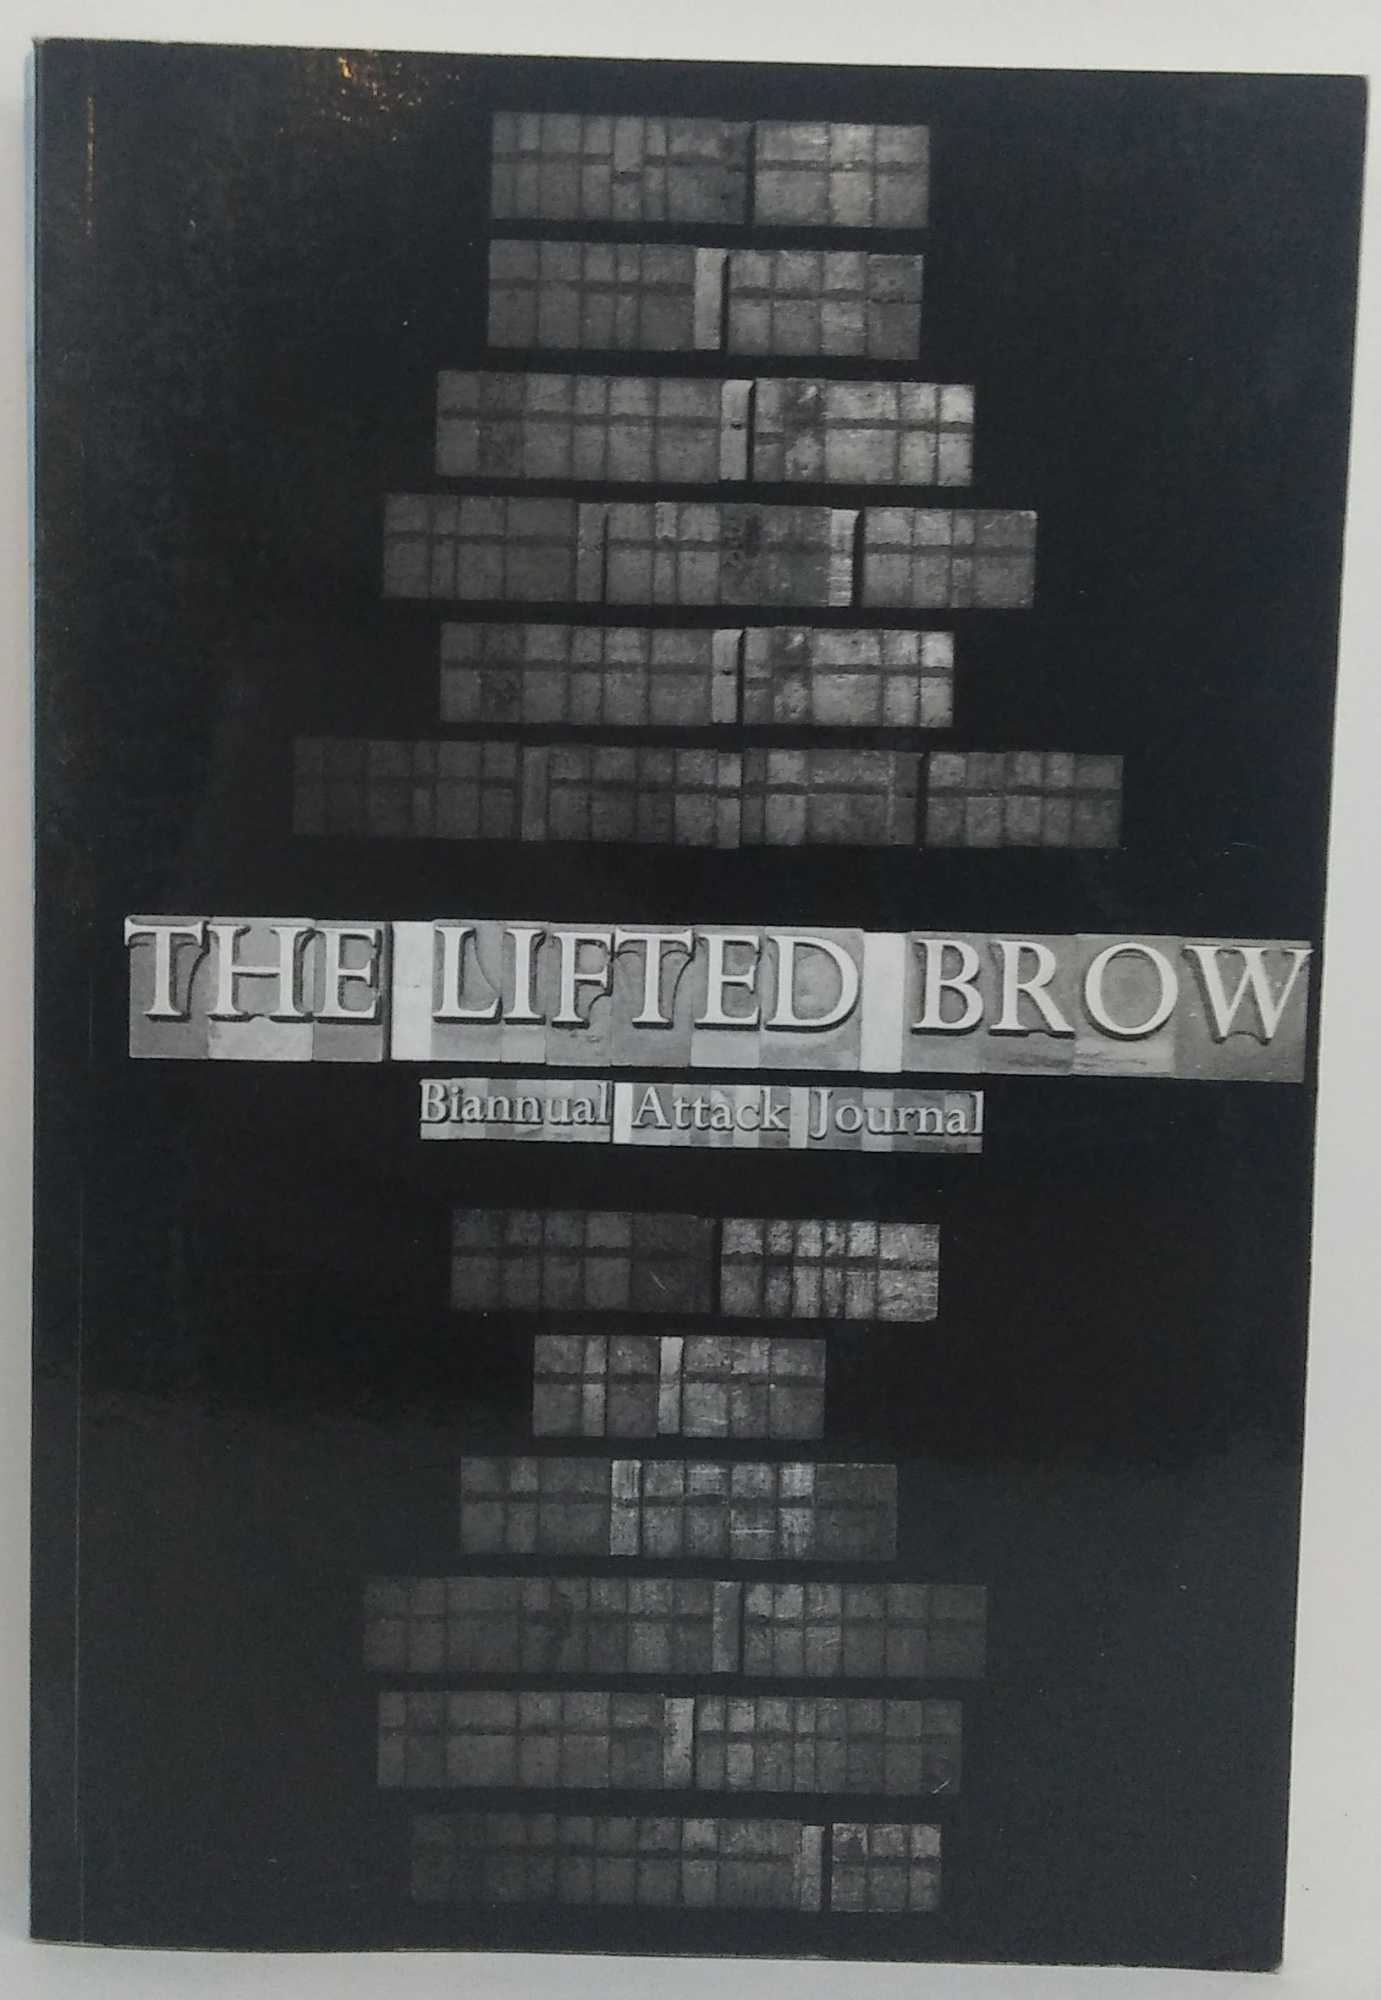 The Lifted Brow - The Lifted Brow, No. 5